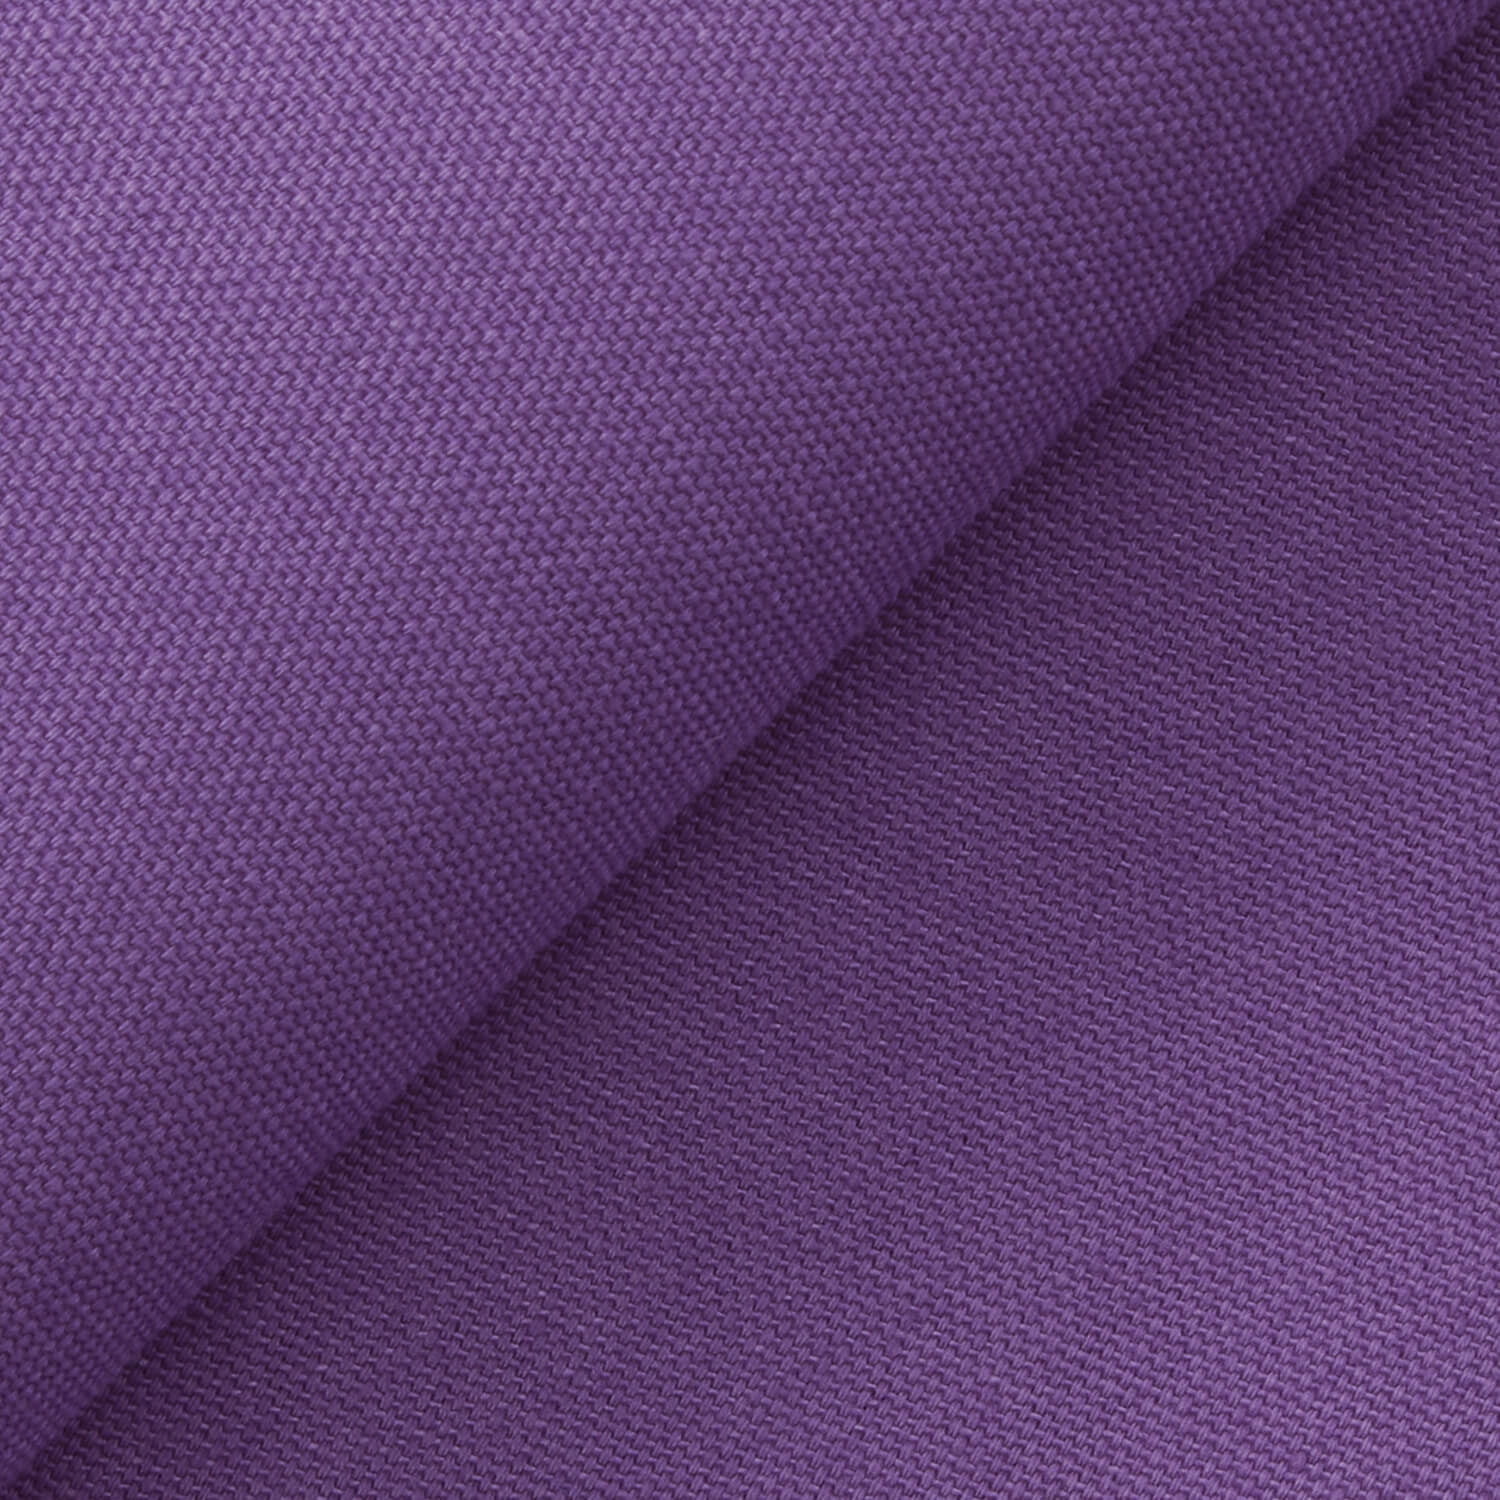 Viking Purple Canvas Fabric by The Yard -9/10 oz 58/60 Wide